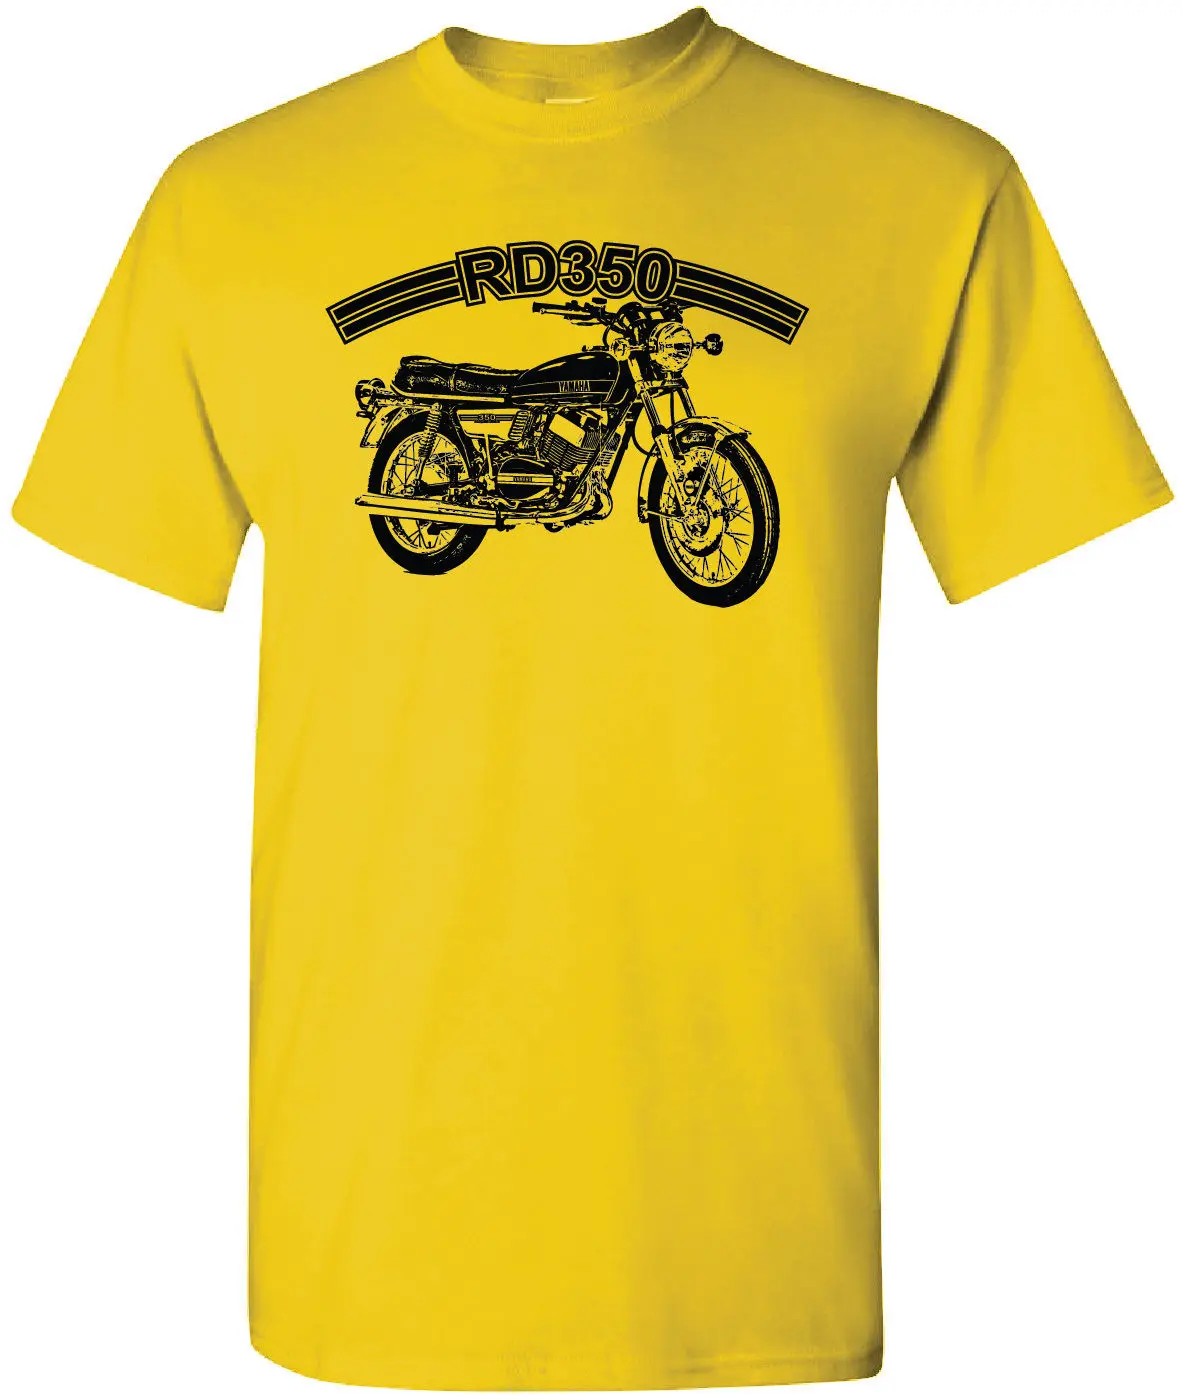 

Hip Hop Novelty Men'S Brand Japan Motorcycle RD 350 Old School Retro Two Stroke Cafe Racer RD350 RD400 RD500 T-ShirtTee Shirt